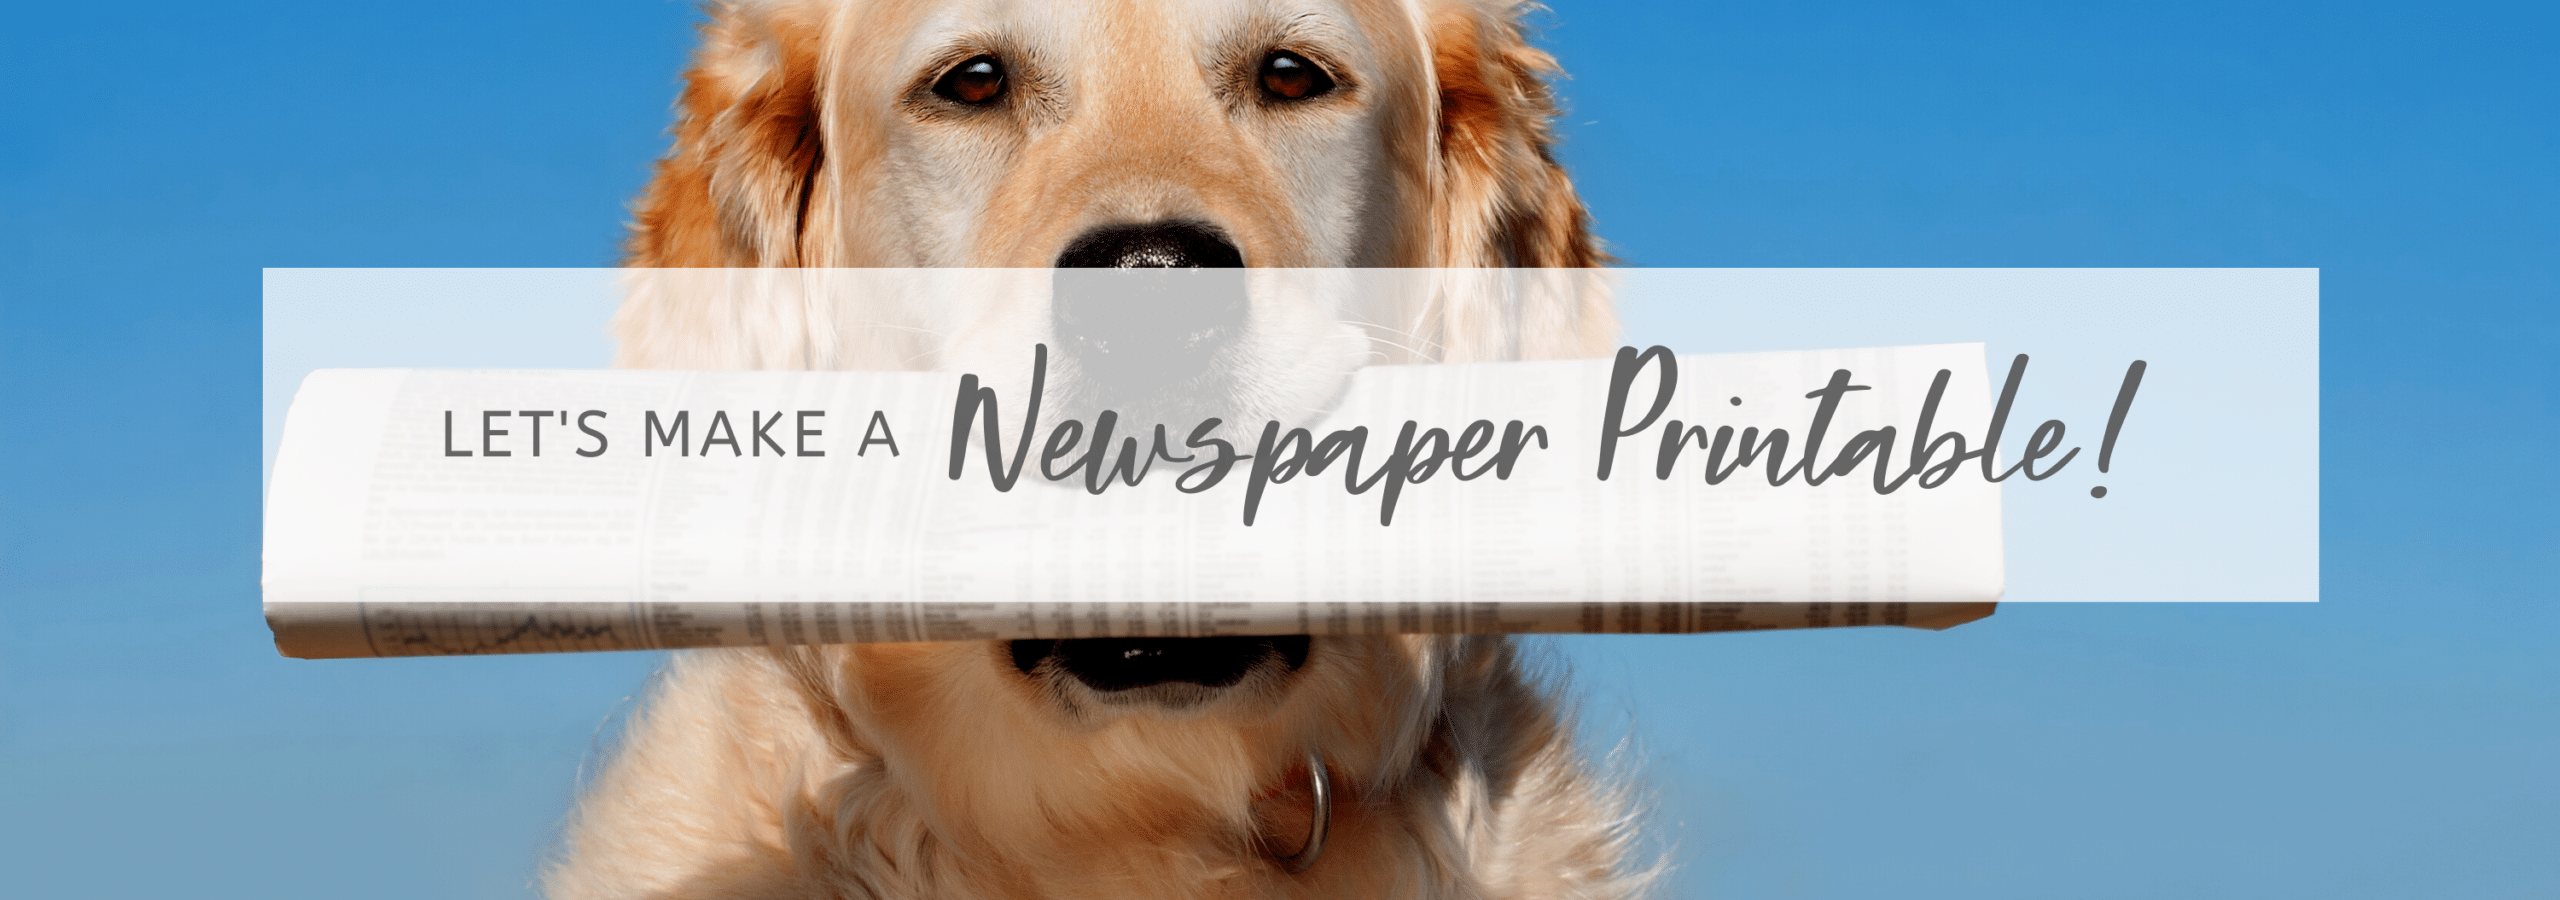 picture of a dog holding a newspaper